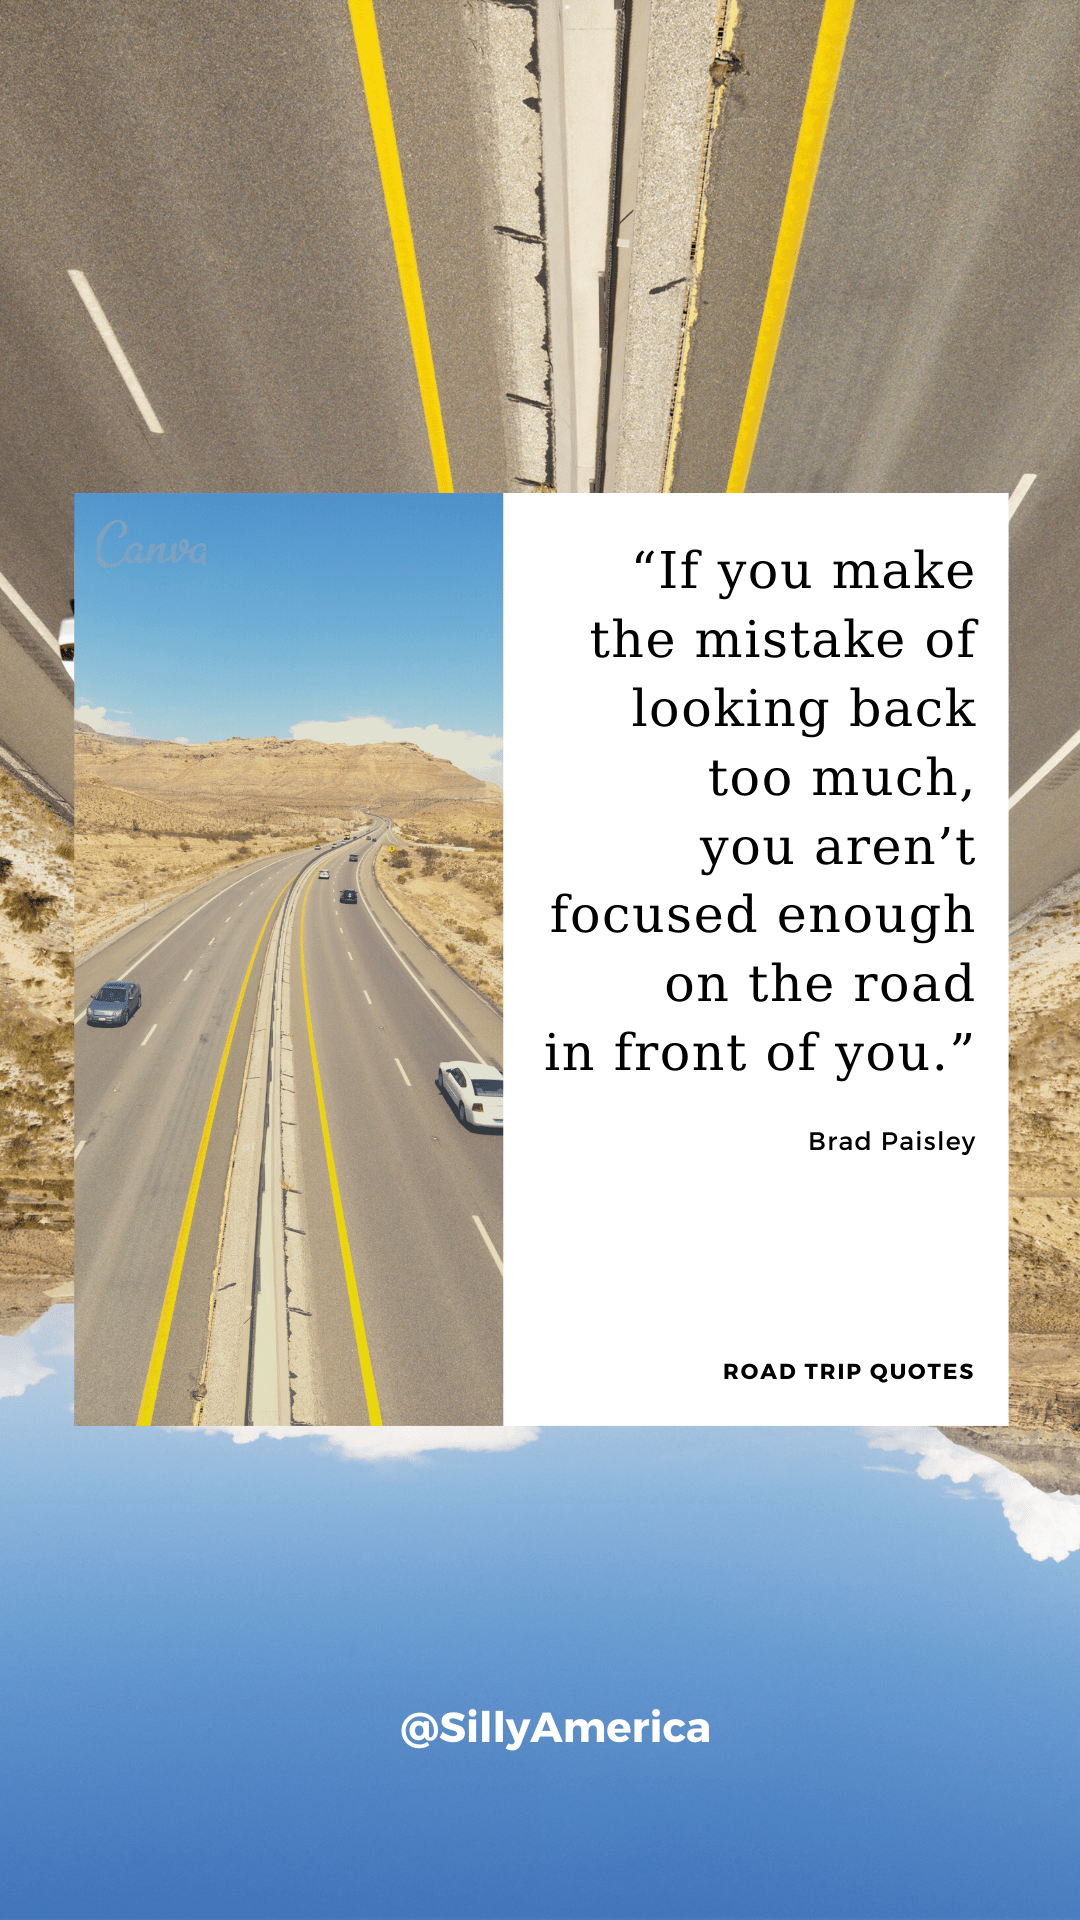 “If you make the mistake of looking back too much, you aren’t focused enough on the road in front of you.” Brad Paisley, American country music singer and songwriter